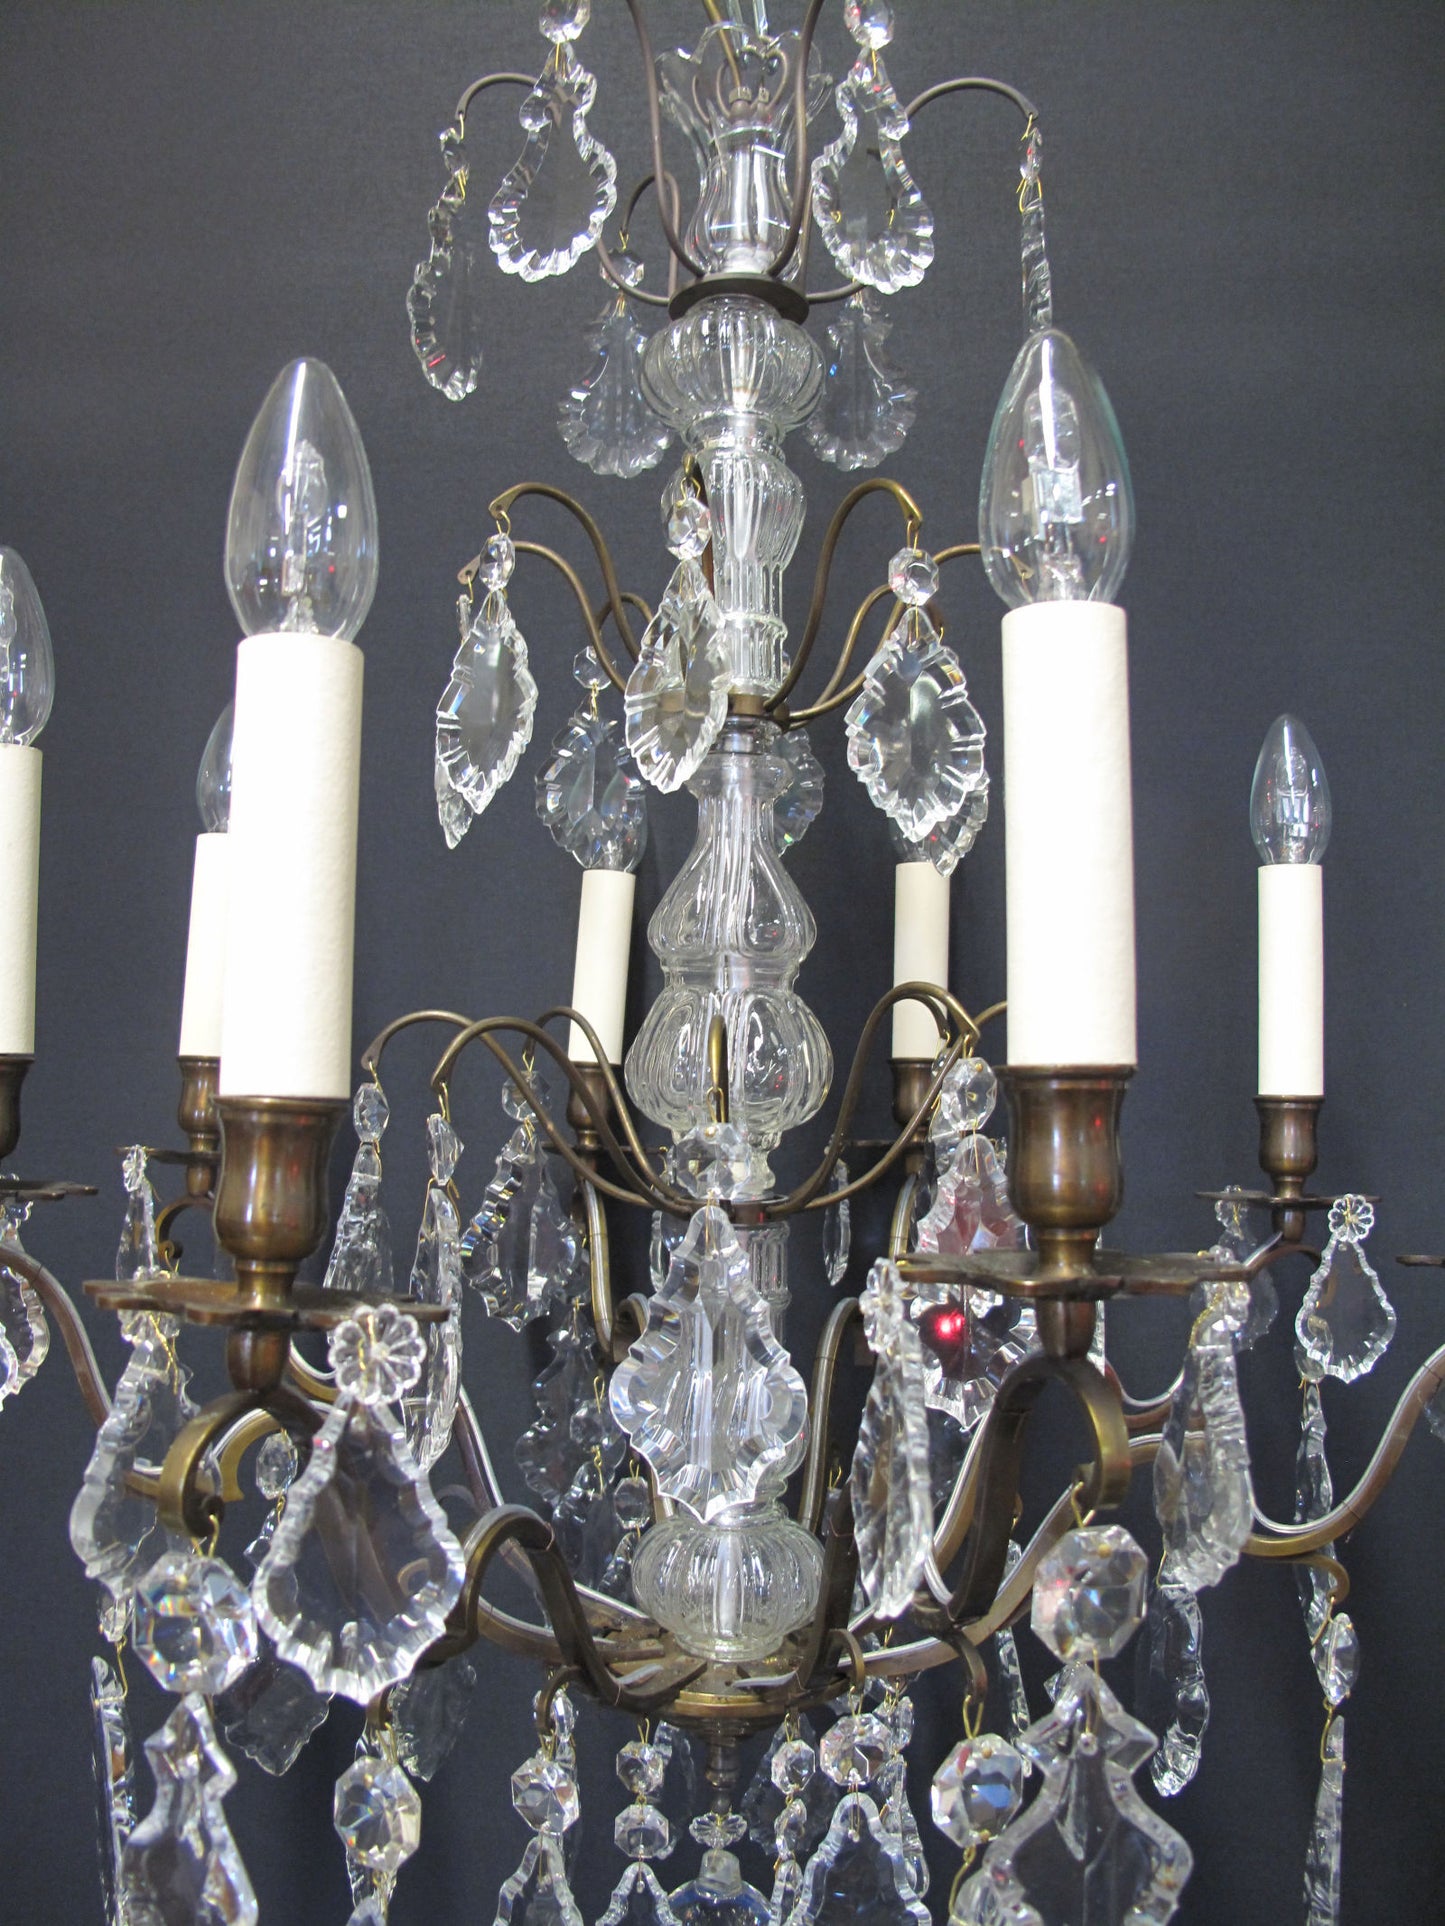 middle part of chandelier